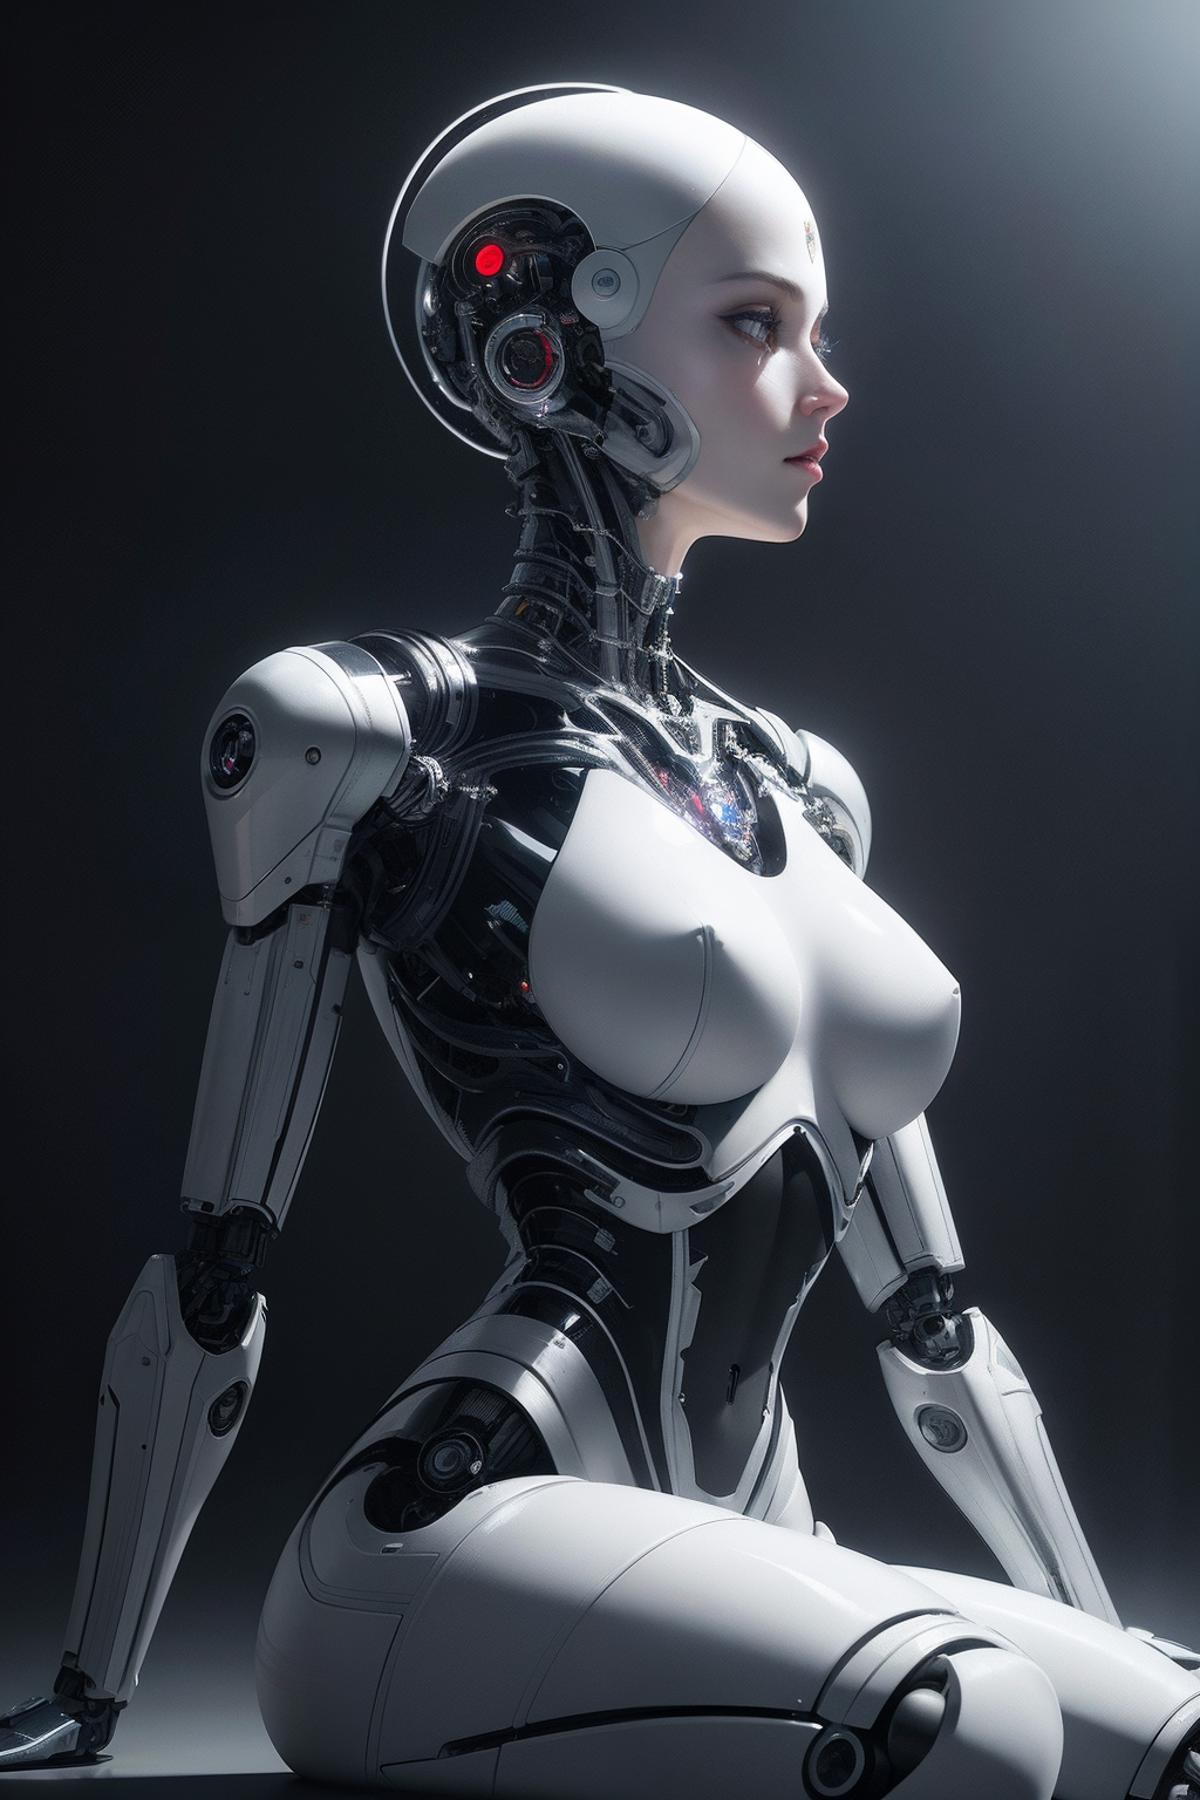 AI model image by JaillJail